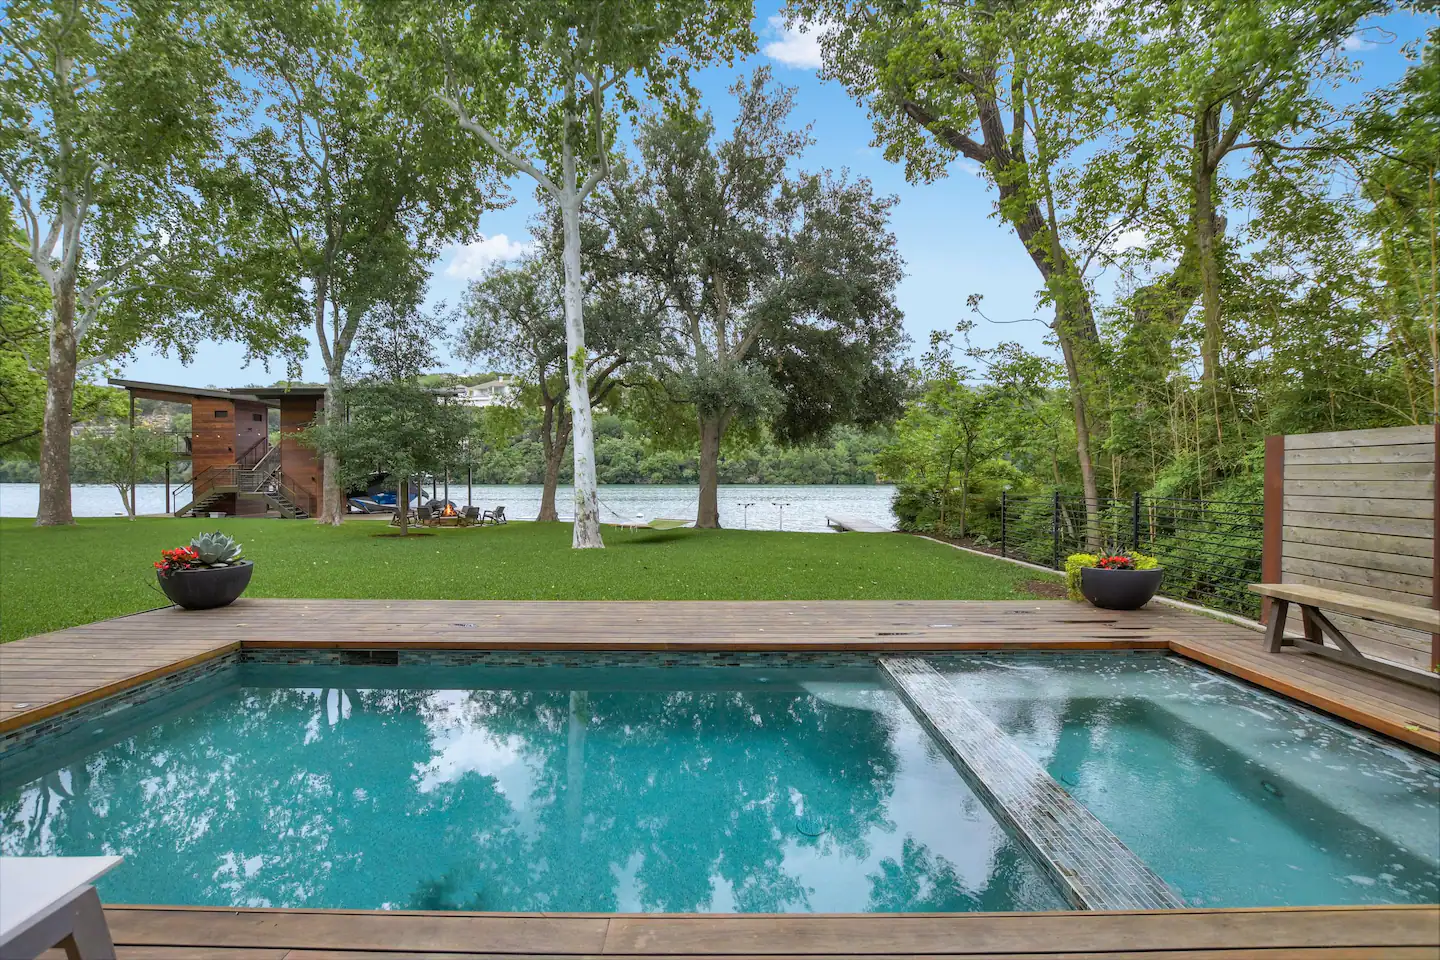 Indulge in the inviting allure of the plunge pool and hot tub outdoors.